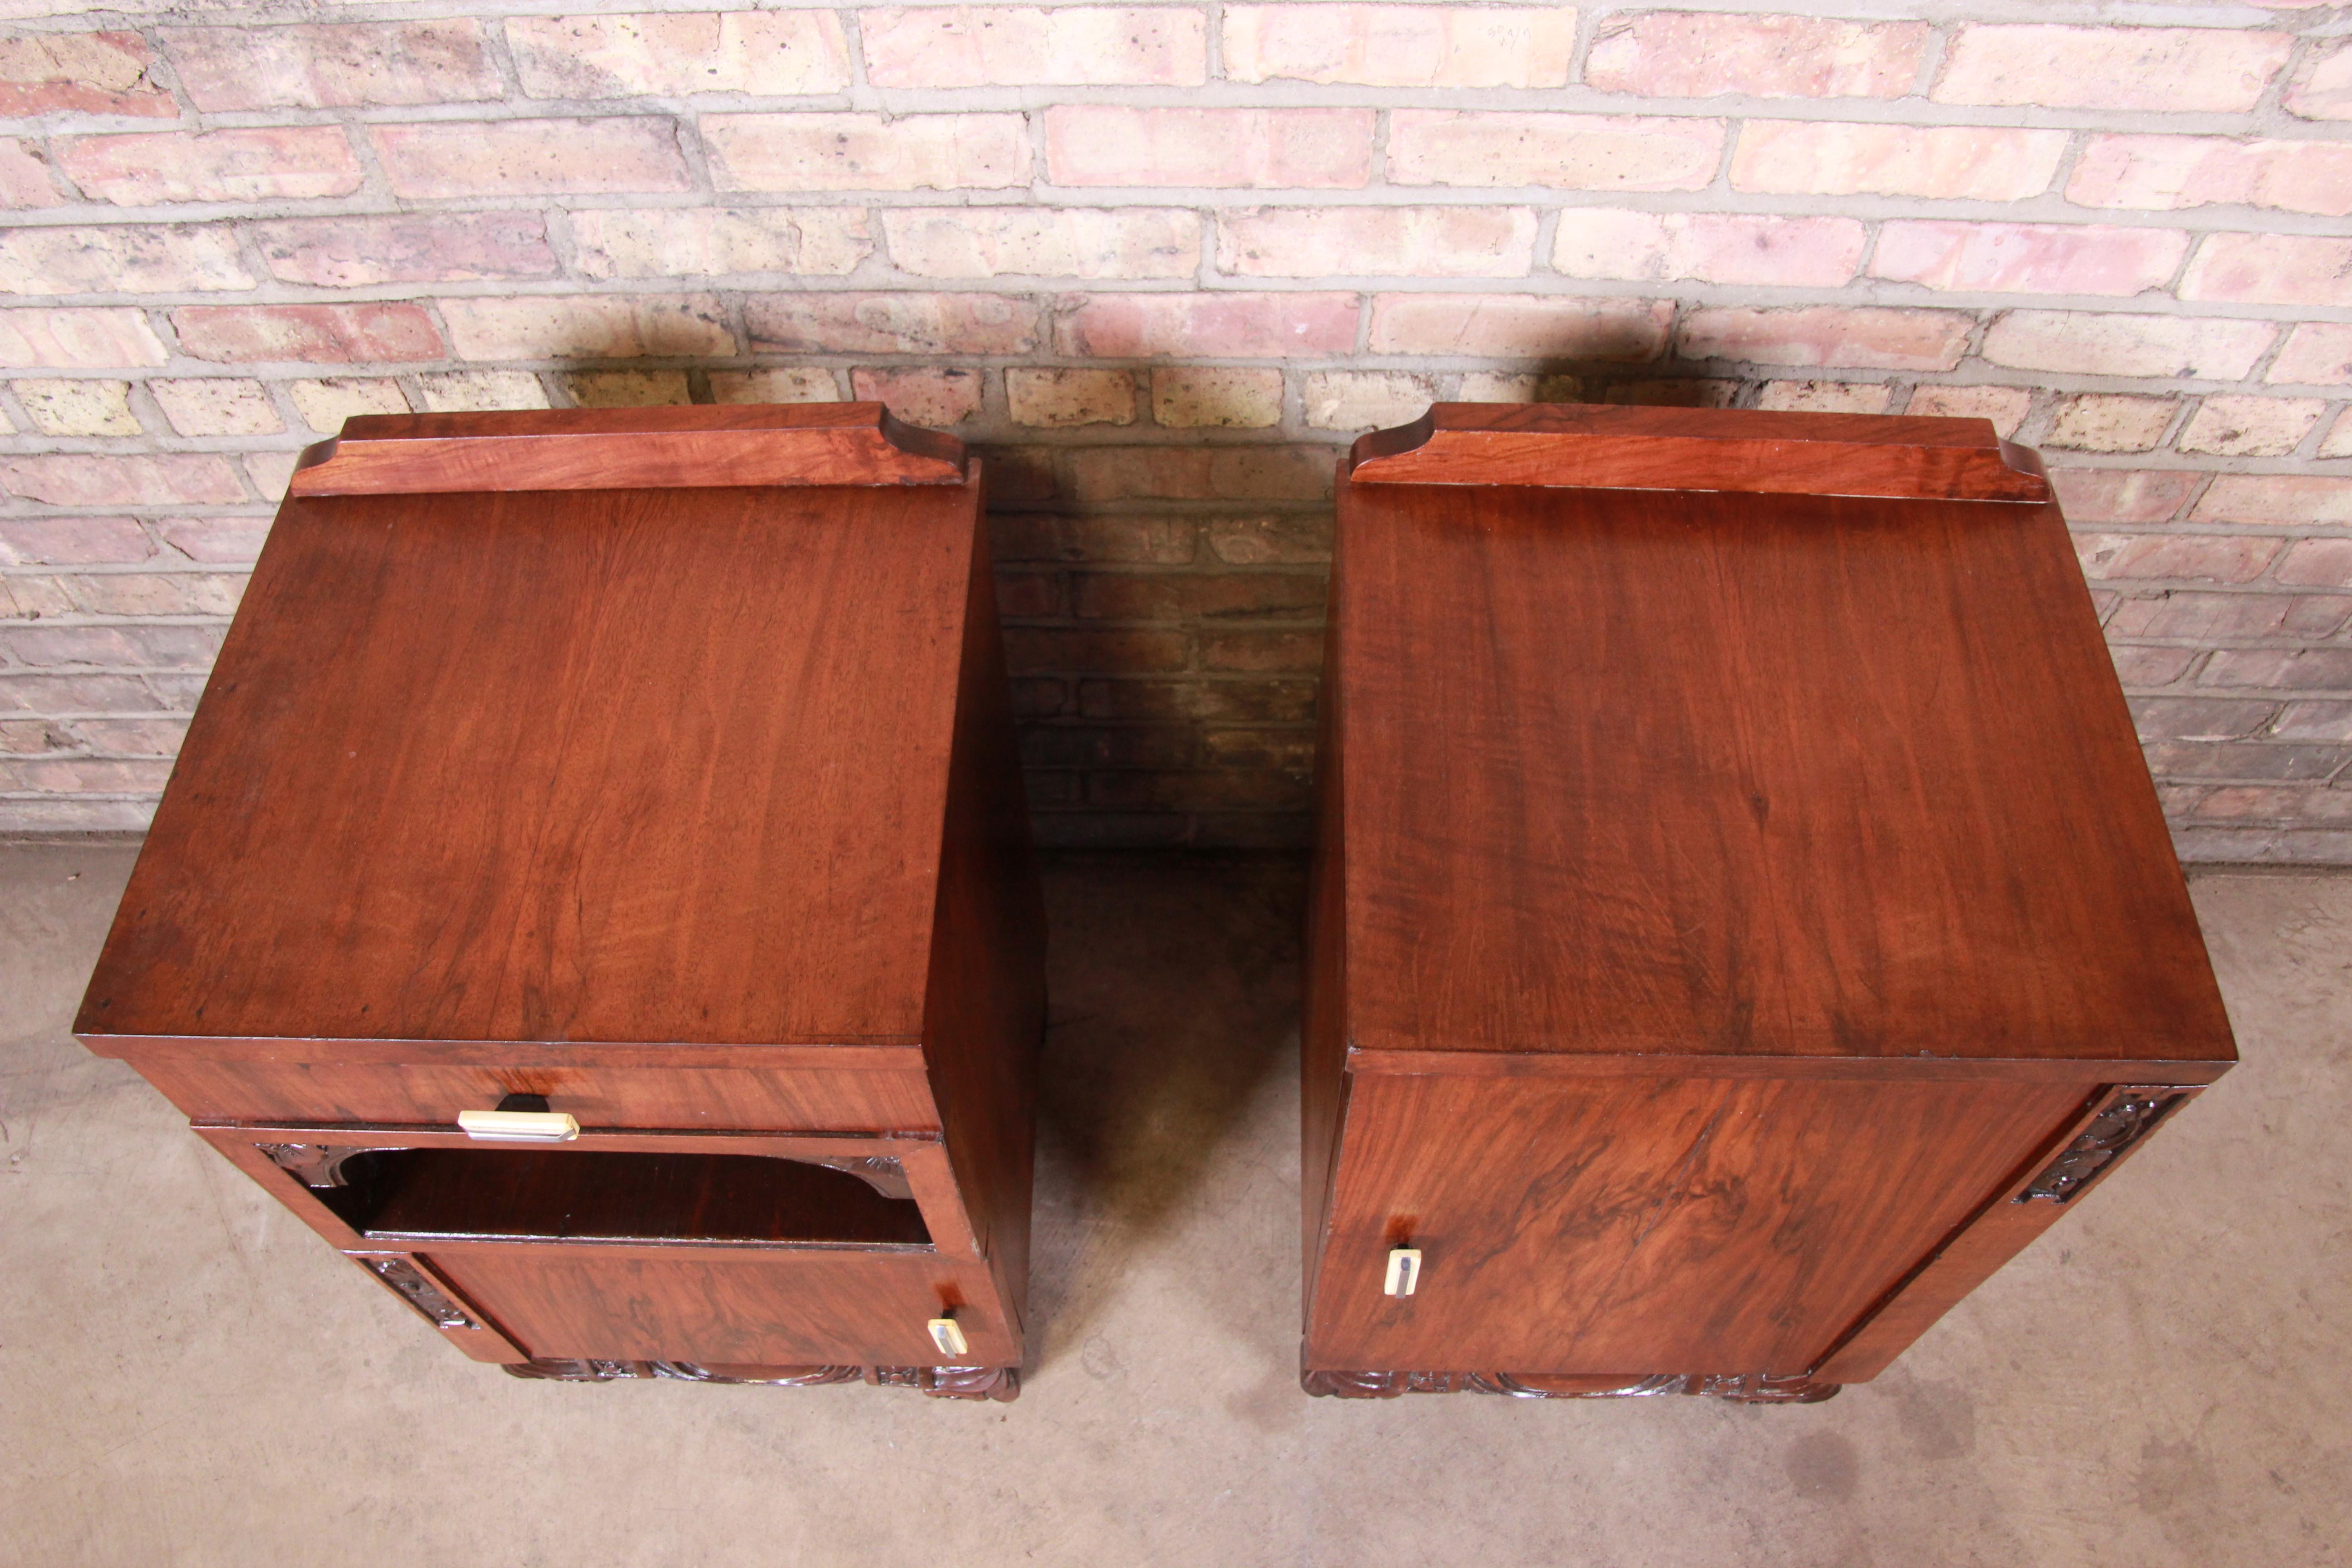 Early 20th Century French Art Deco Rosewood Nightstands, circa 1920s